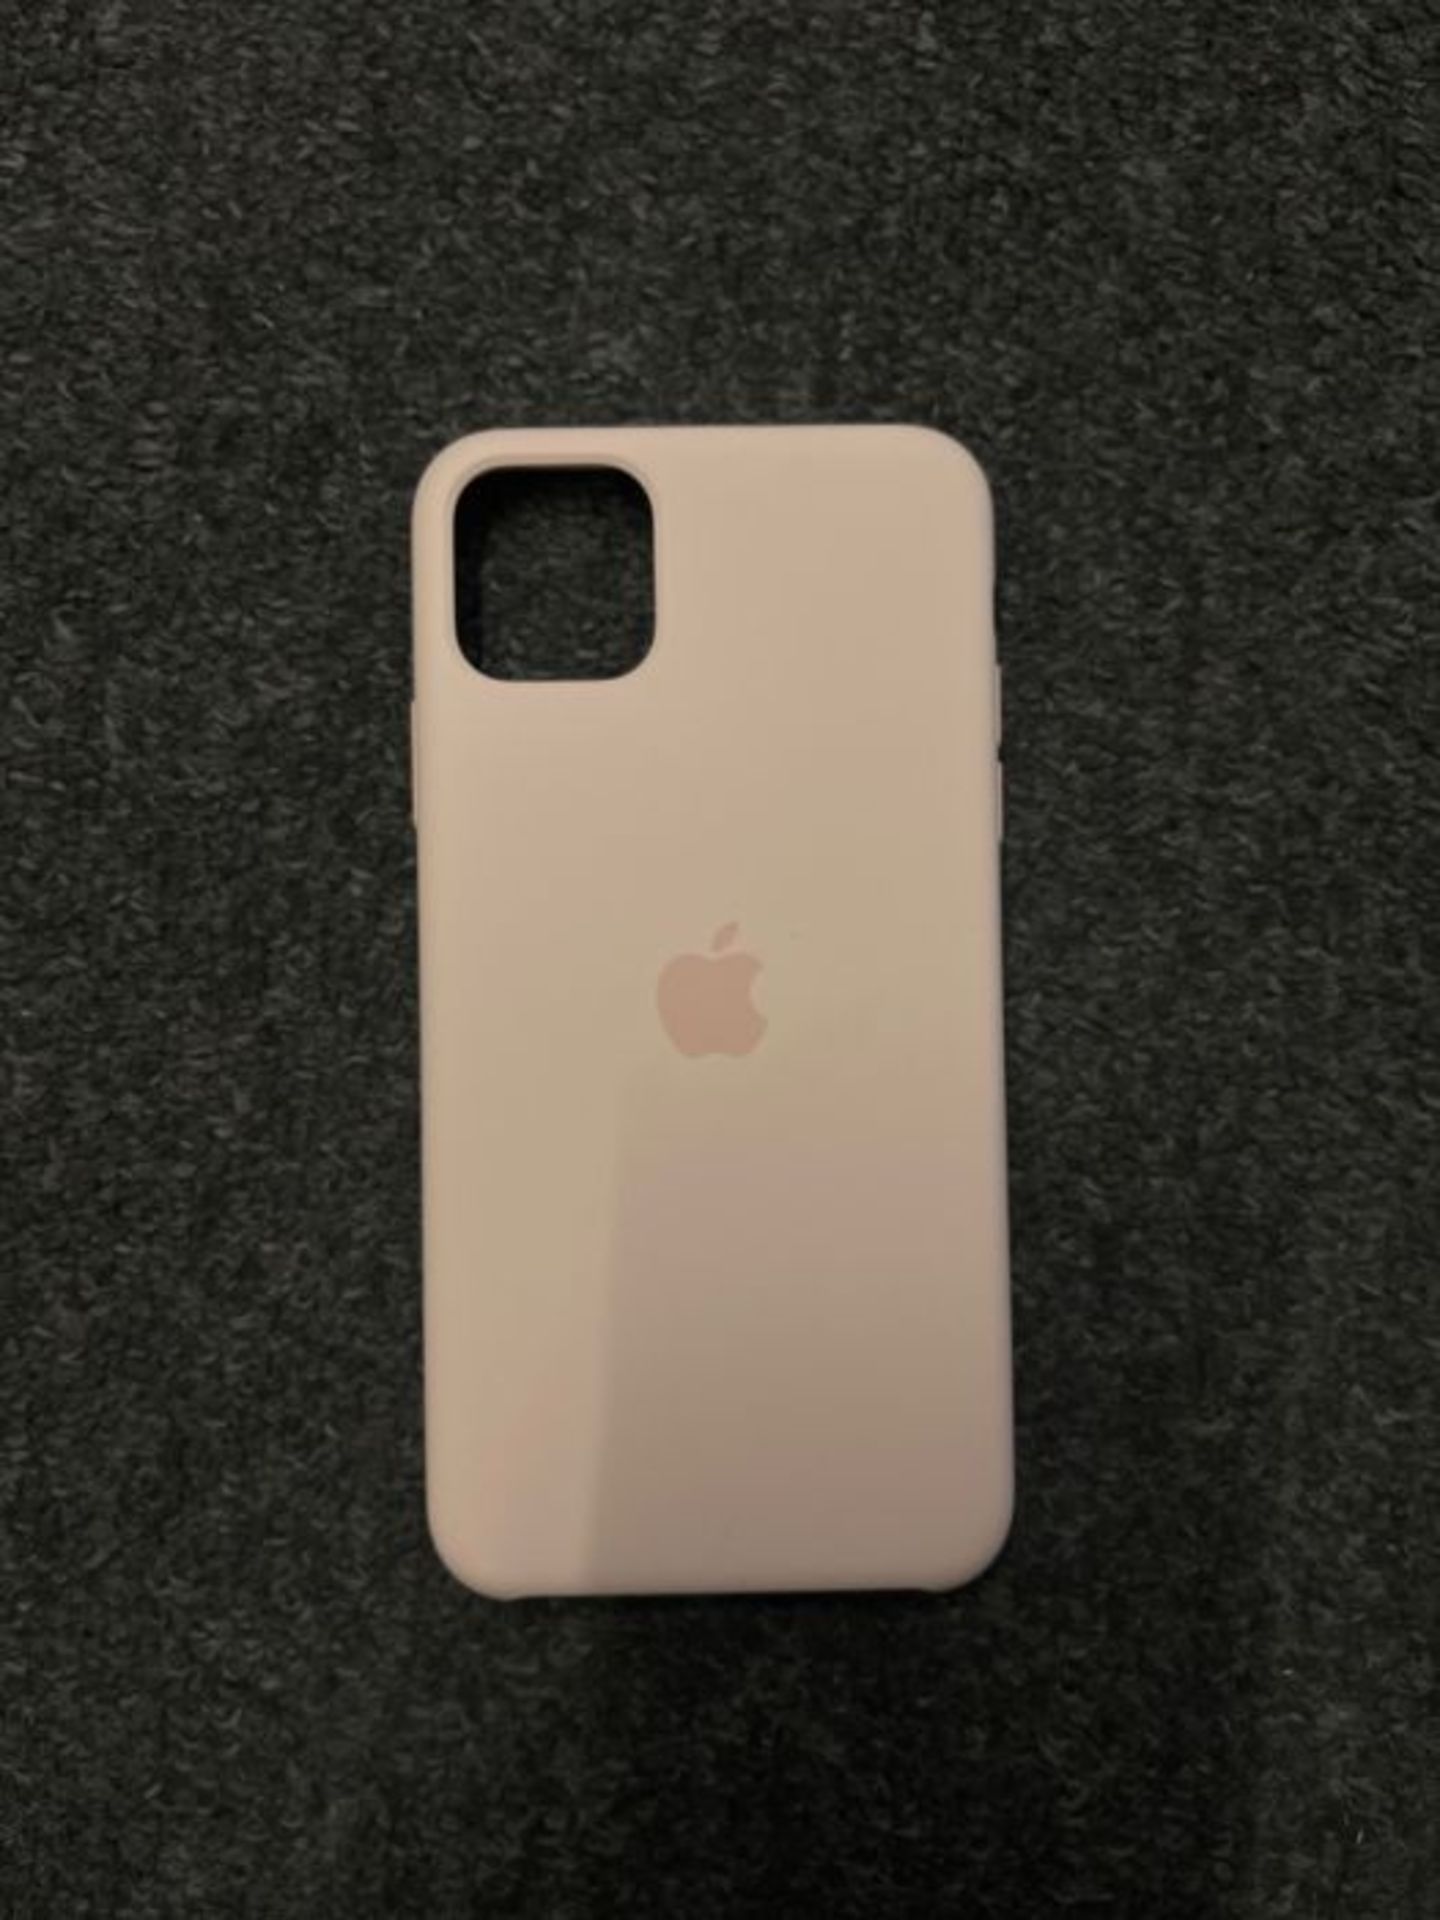 Apple Silicone Case (for iPhone 11 Pro Max) - Pink Sand - Image 2 of 2